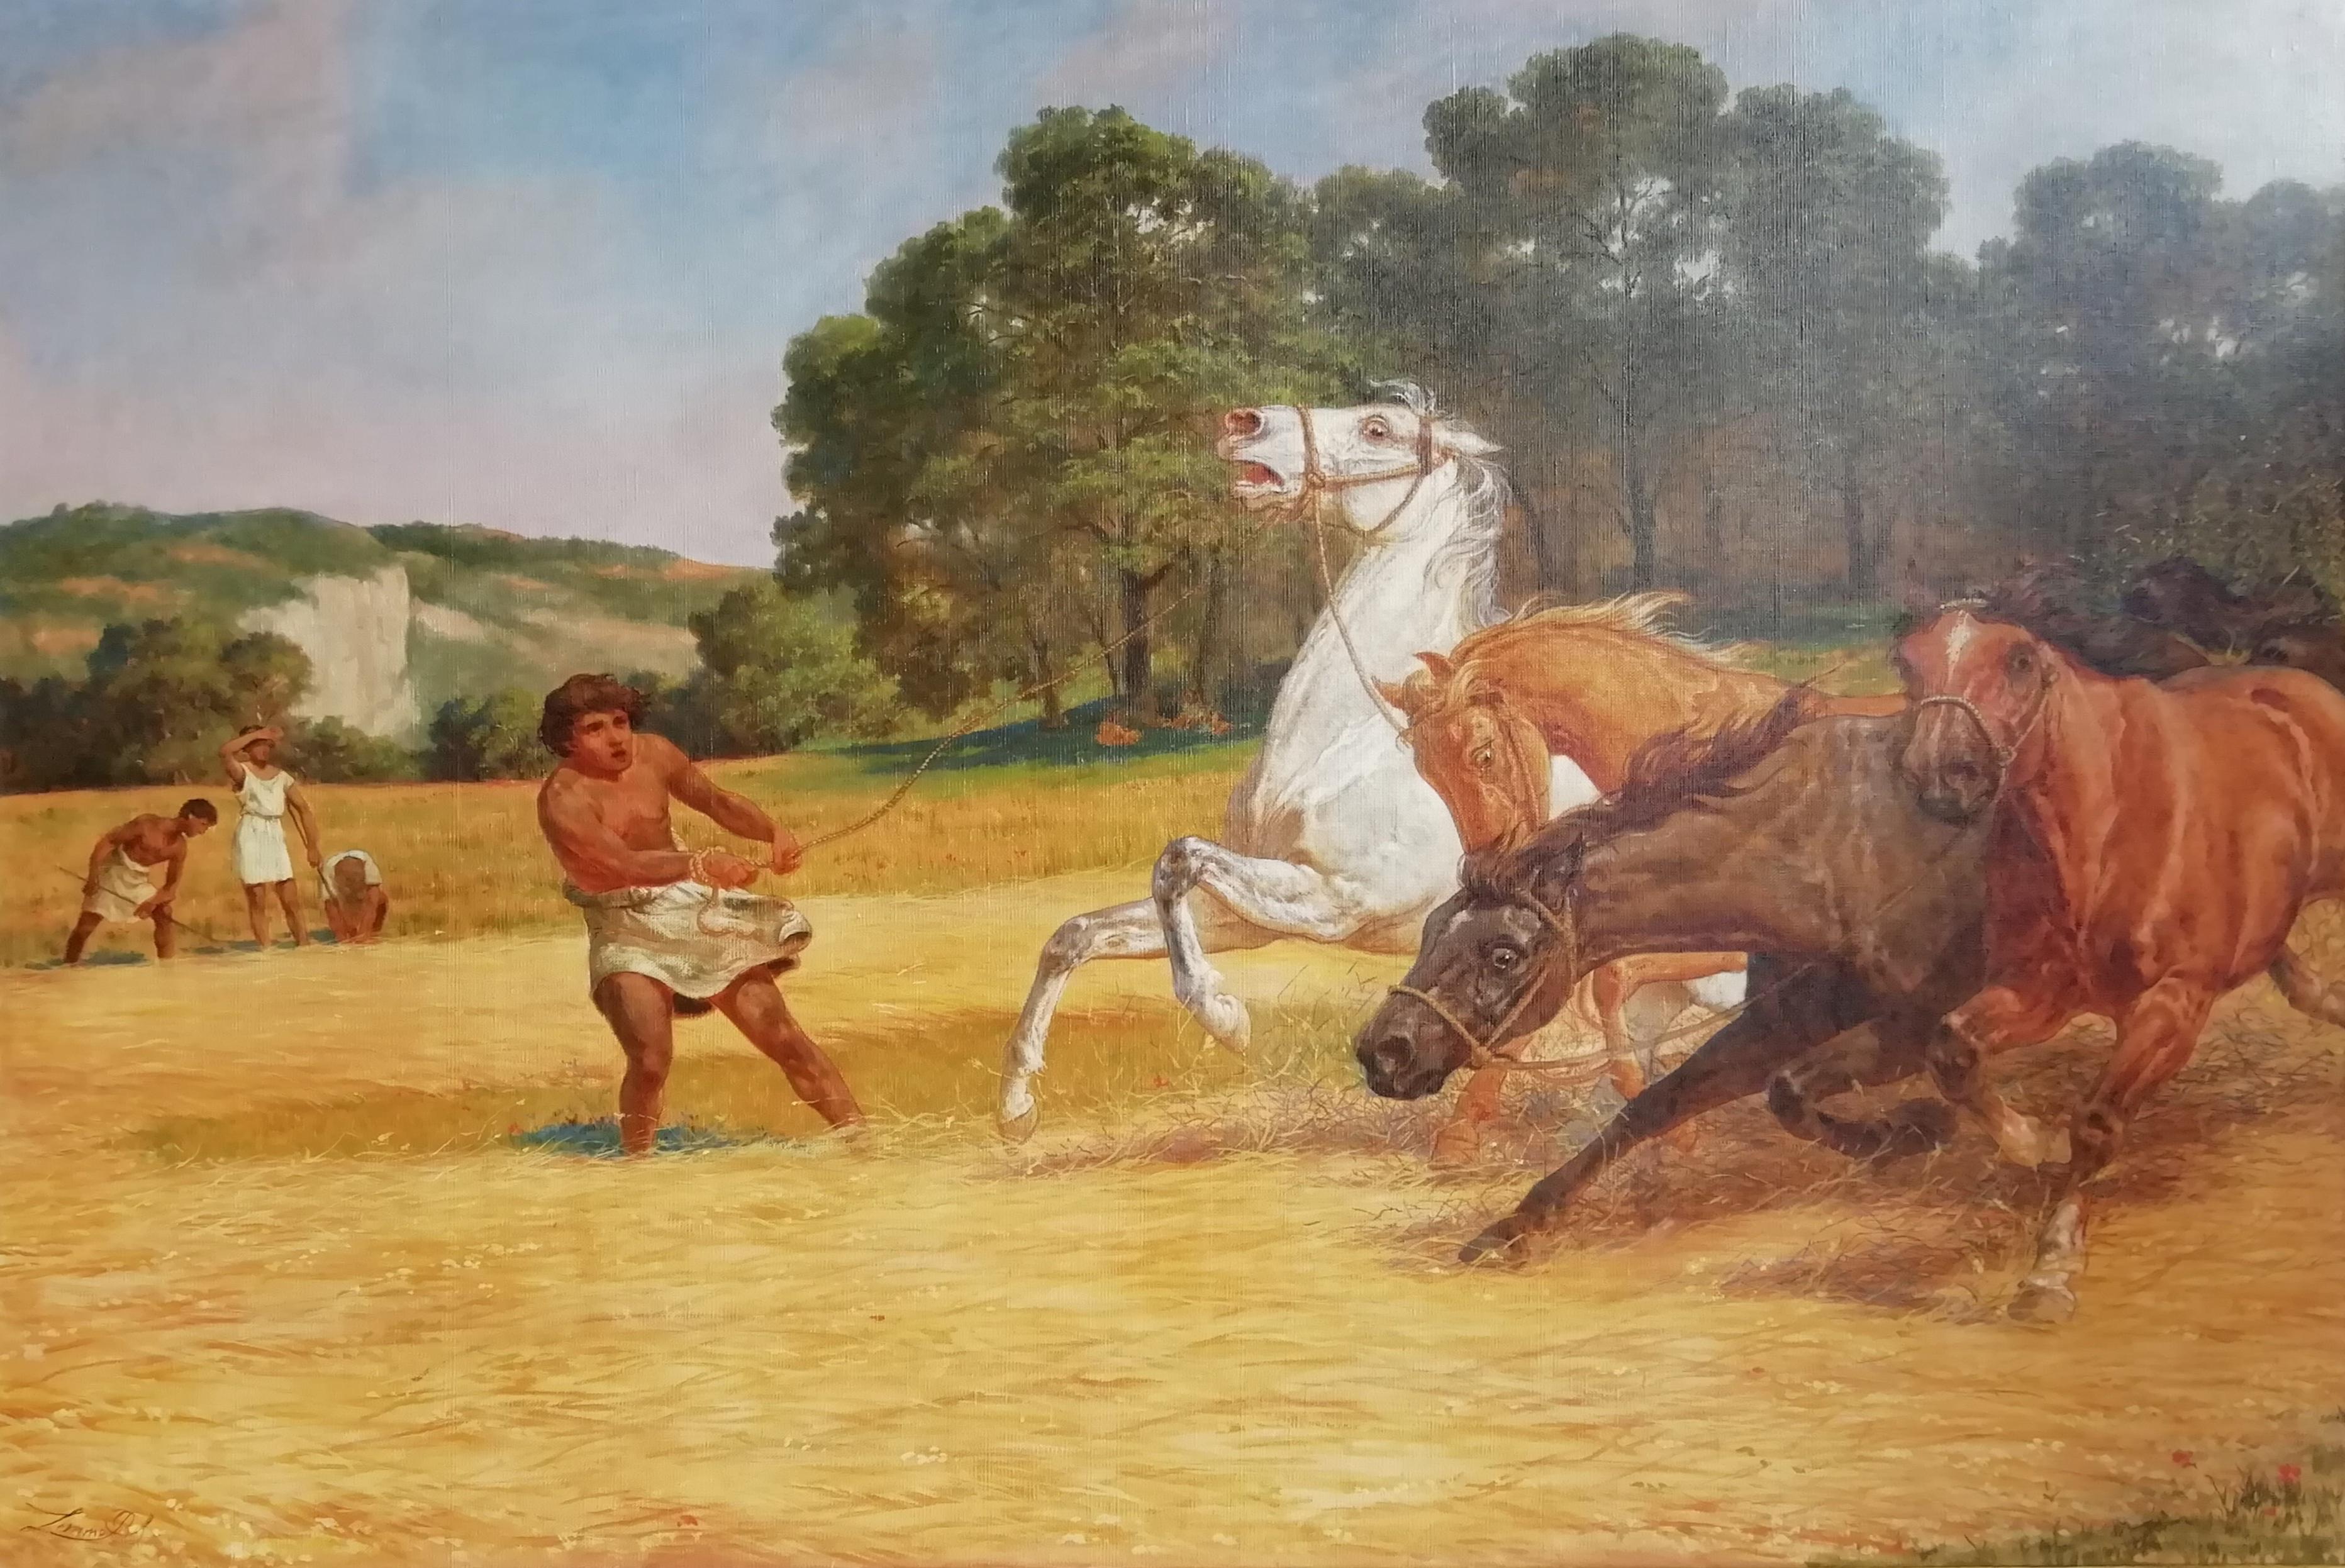 Lemmo Rossi Scotti (Perugia 1848-Roma 1926)
The beating of hay in the golden age
Signed lower left: Lemmo R S

Lemmo Rossi-Scotti, count of Montepetriolo, one of the most prolific 19th century painters of battles, was the son of Gaspare, who had